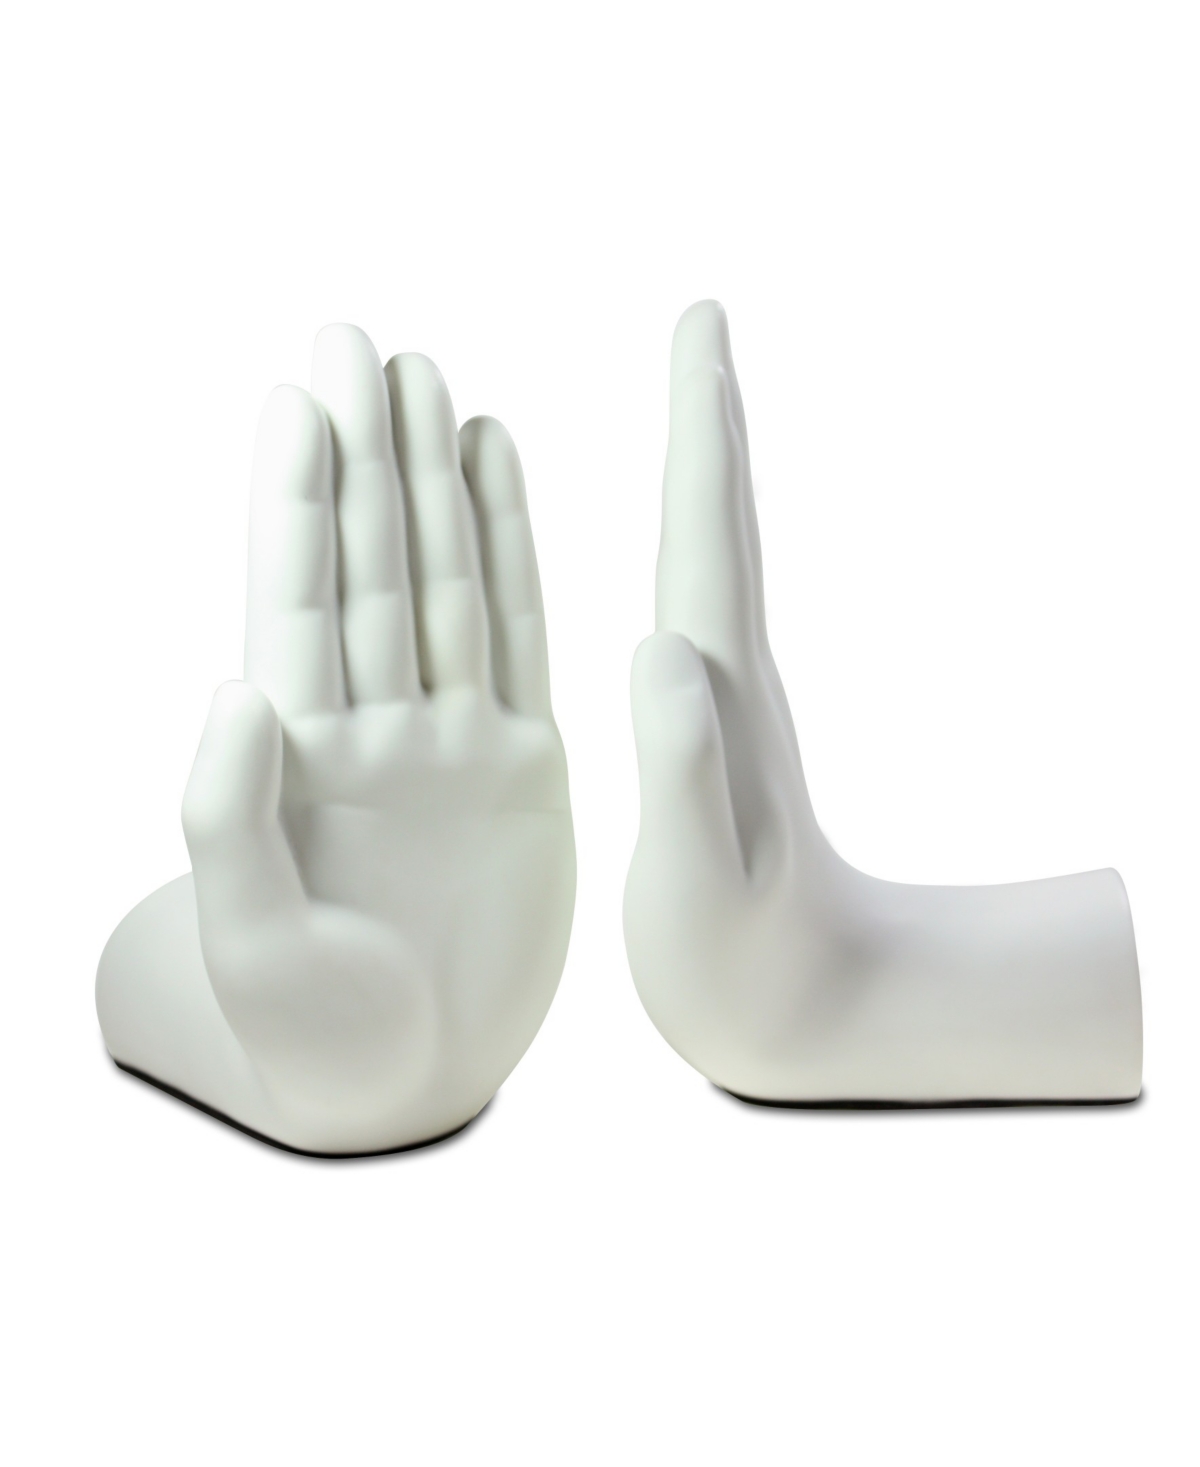 Danya B . "hands" Bookend Set Of 2 In White